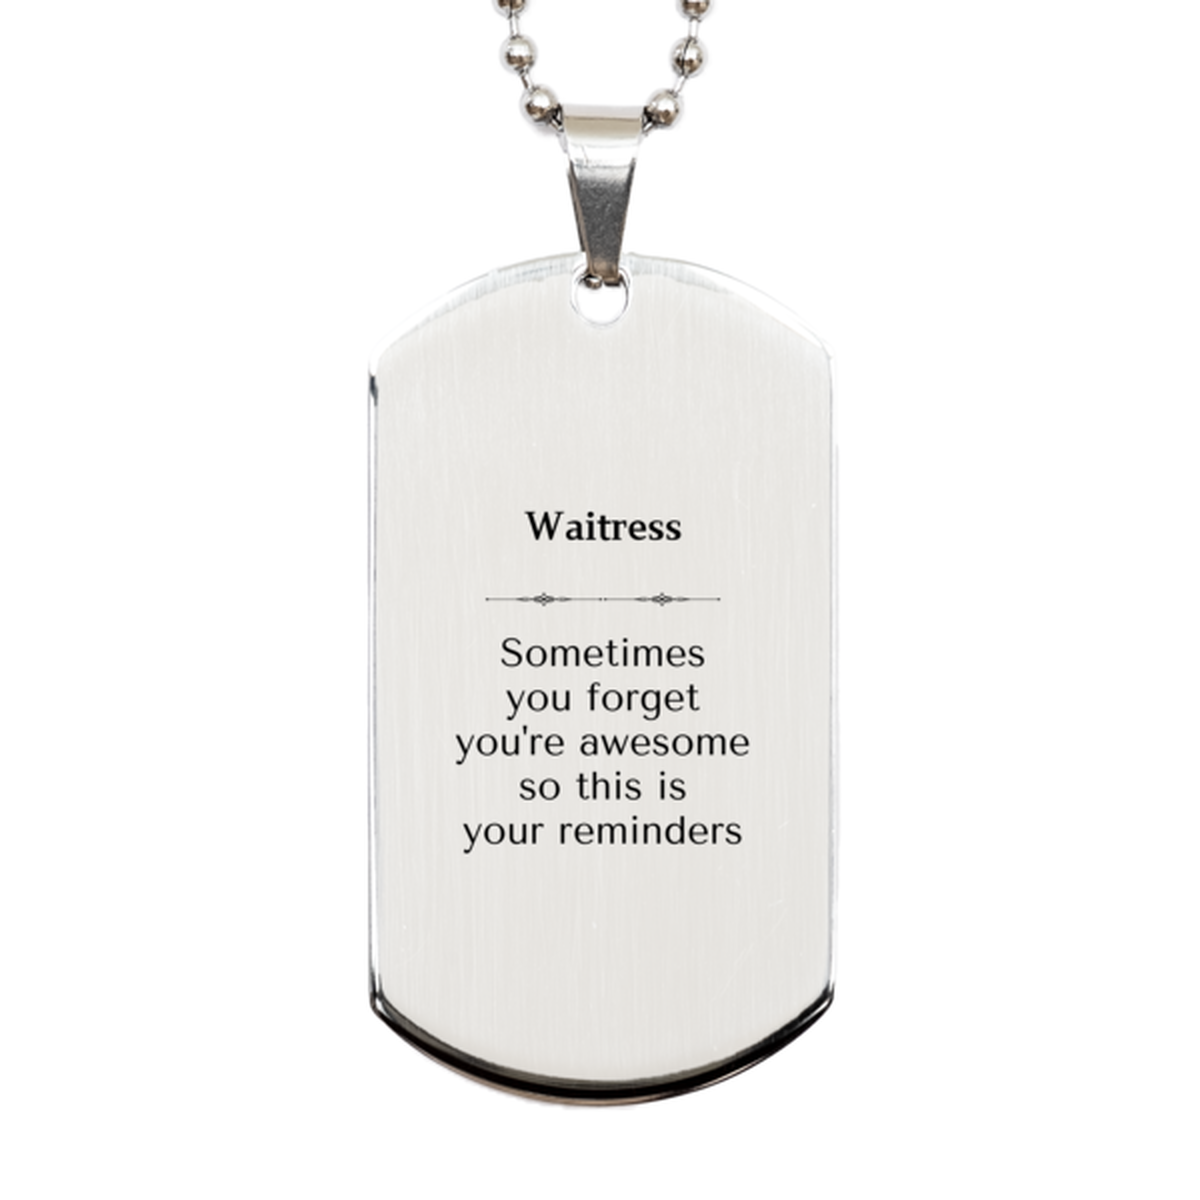 Sentimental Waitress Silver Dog Tag, Waitress Sometimes you forget you're awesome so this is your reminders, Graduation Christmas Birthday Gifts for Waitress, Men, Women, Coworkers